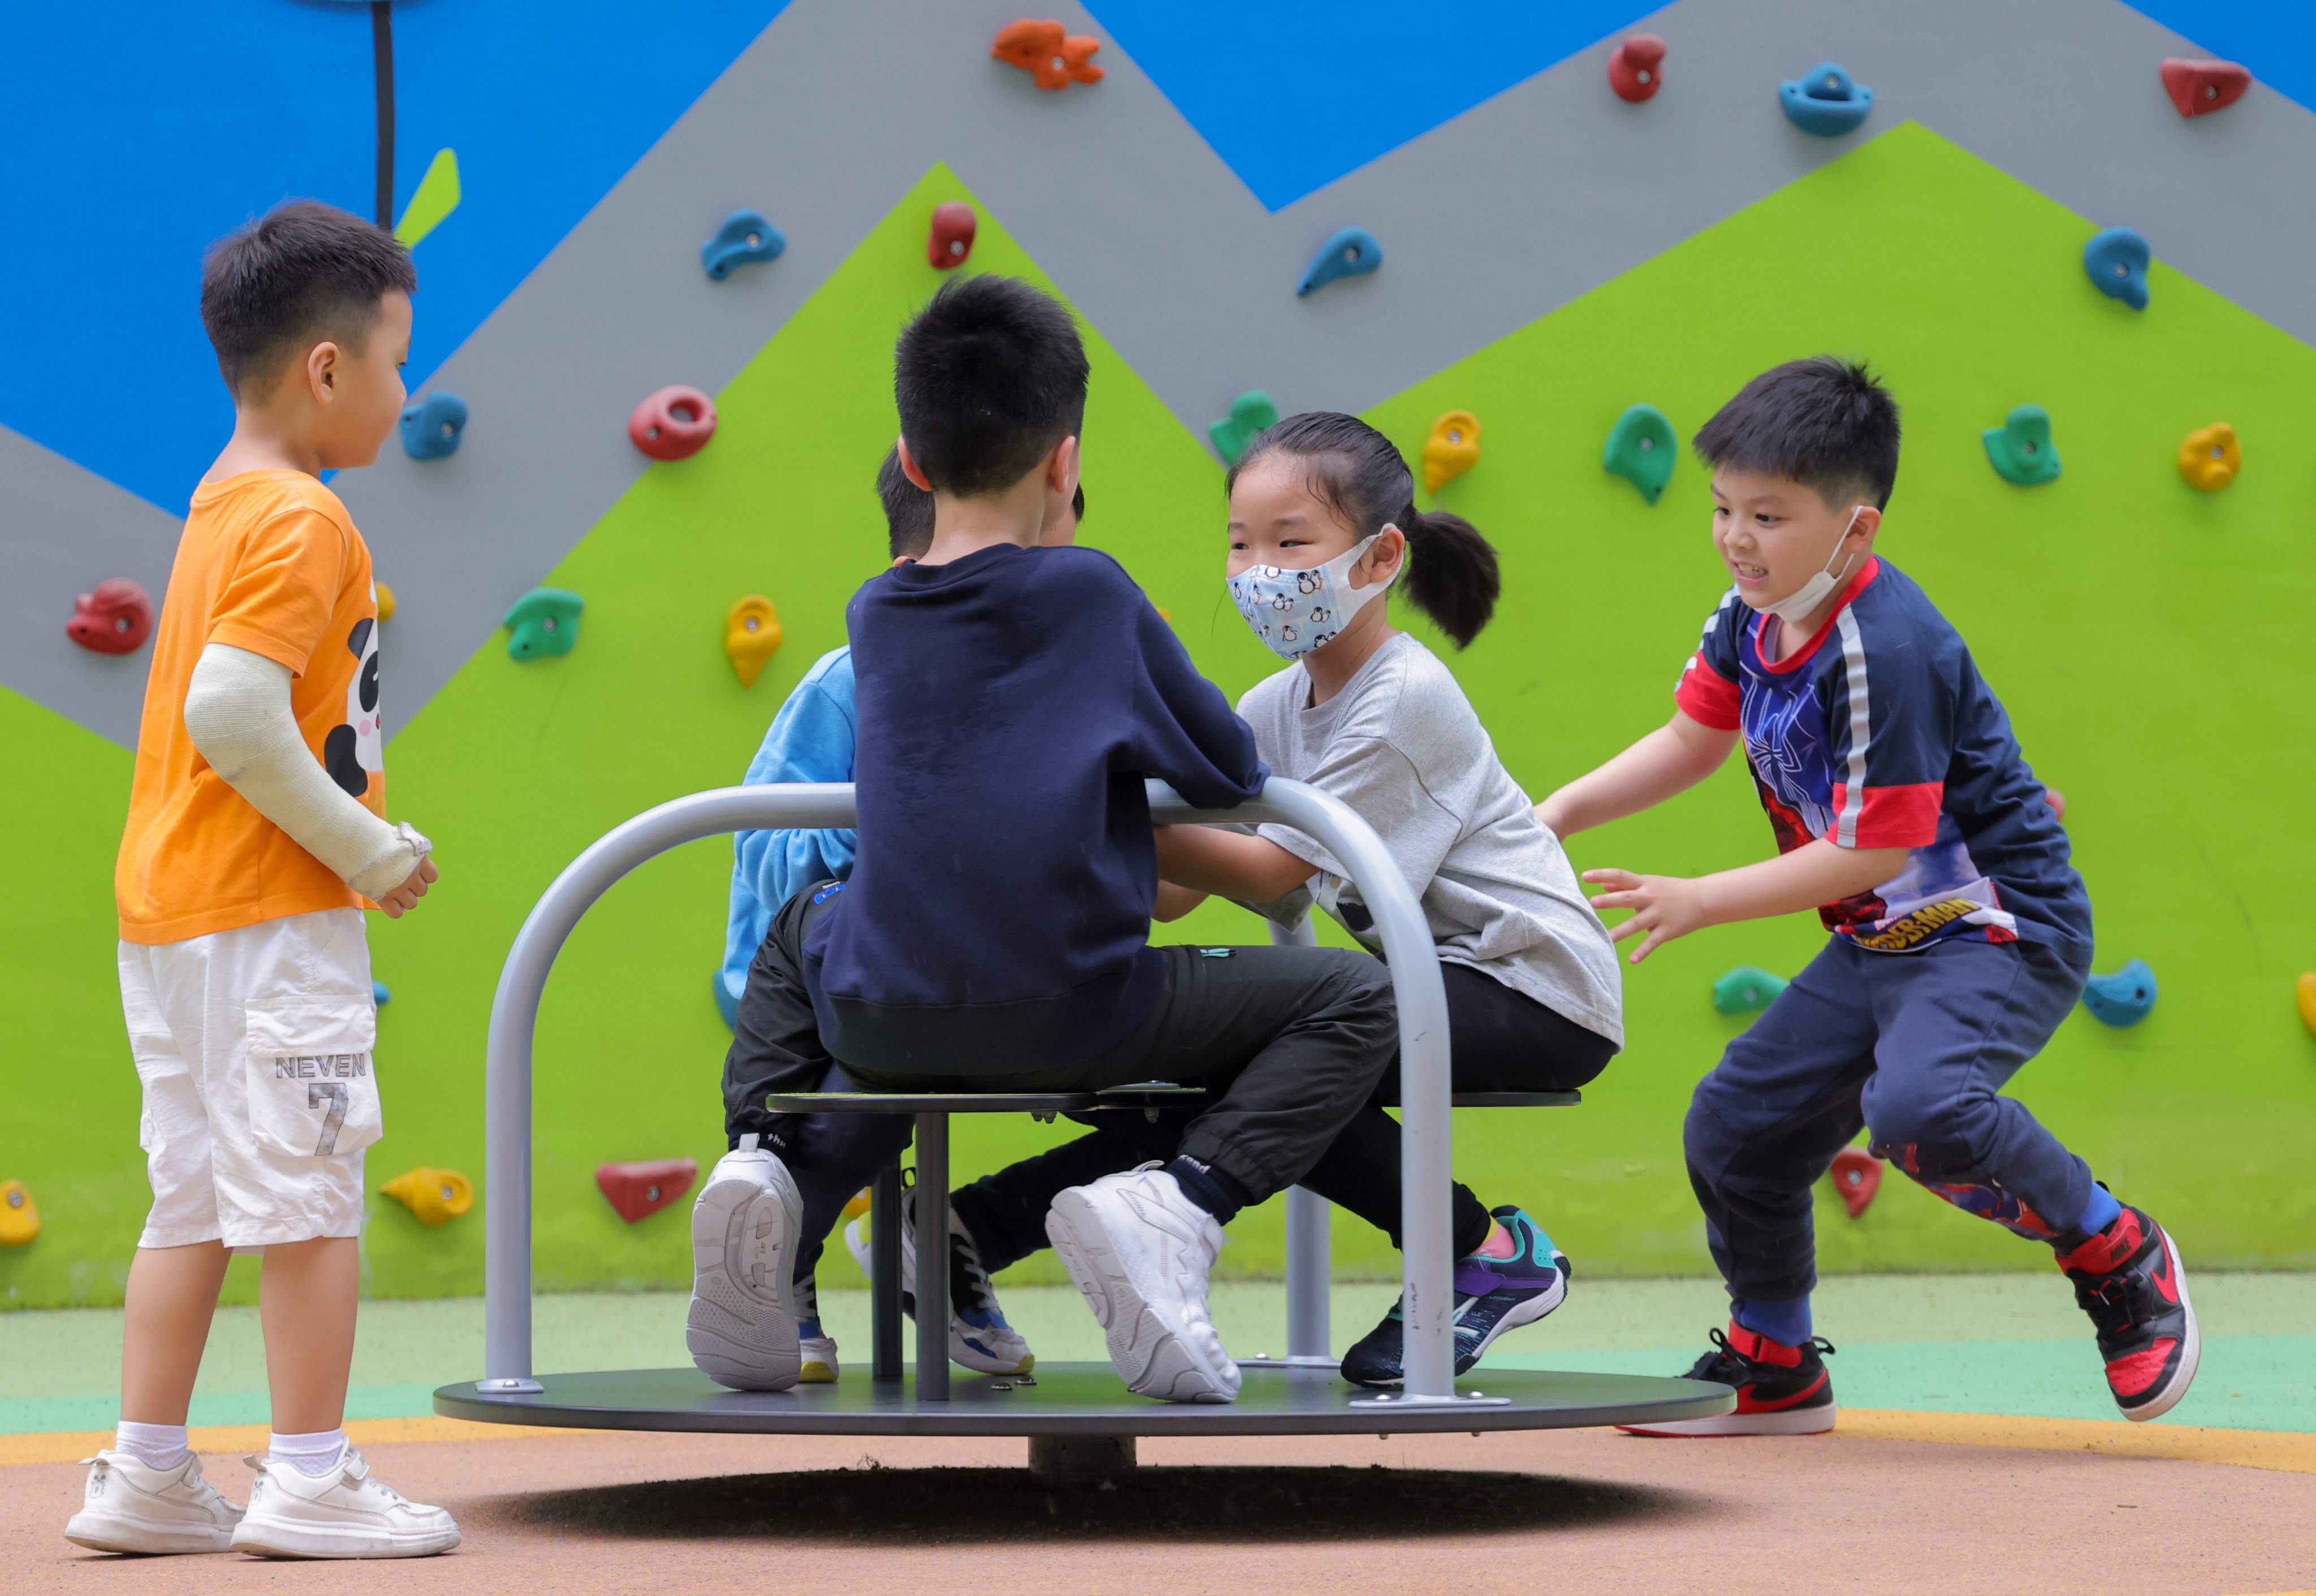 Children and the elderly among the high risk groups for flu as medical experts say vaccination offers the best protection. Photo: Jelly Tse